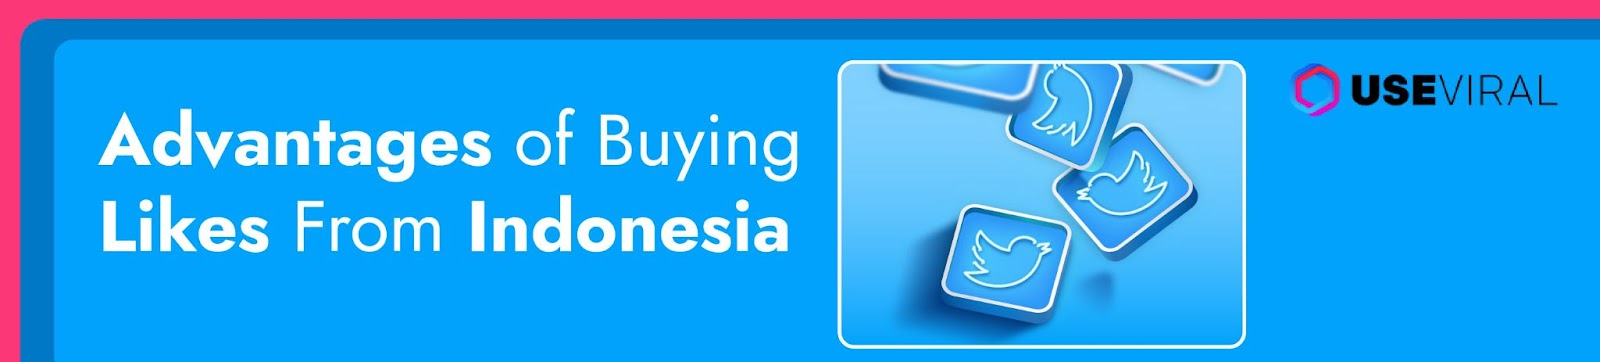 Advantages of Buying Twitter Likes From Indonesia